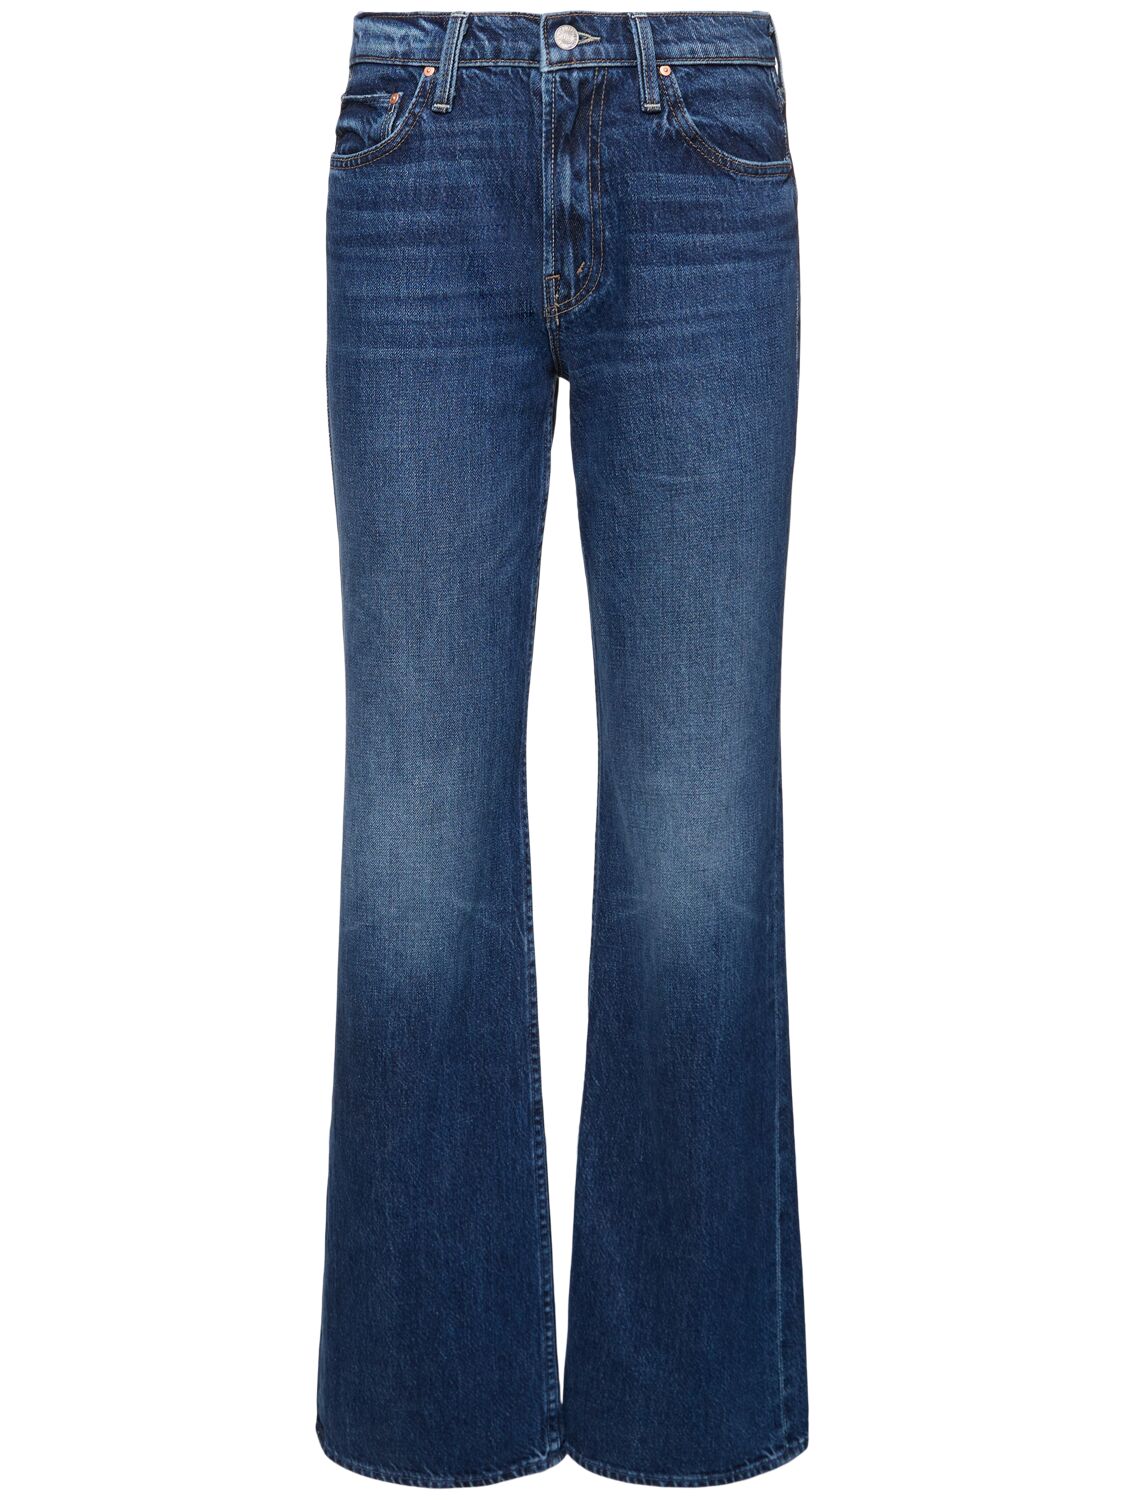 The Bookie Heel High Rise Jeans